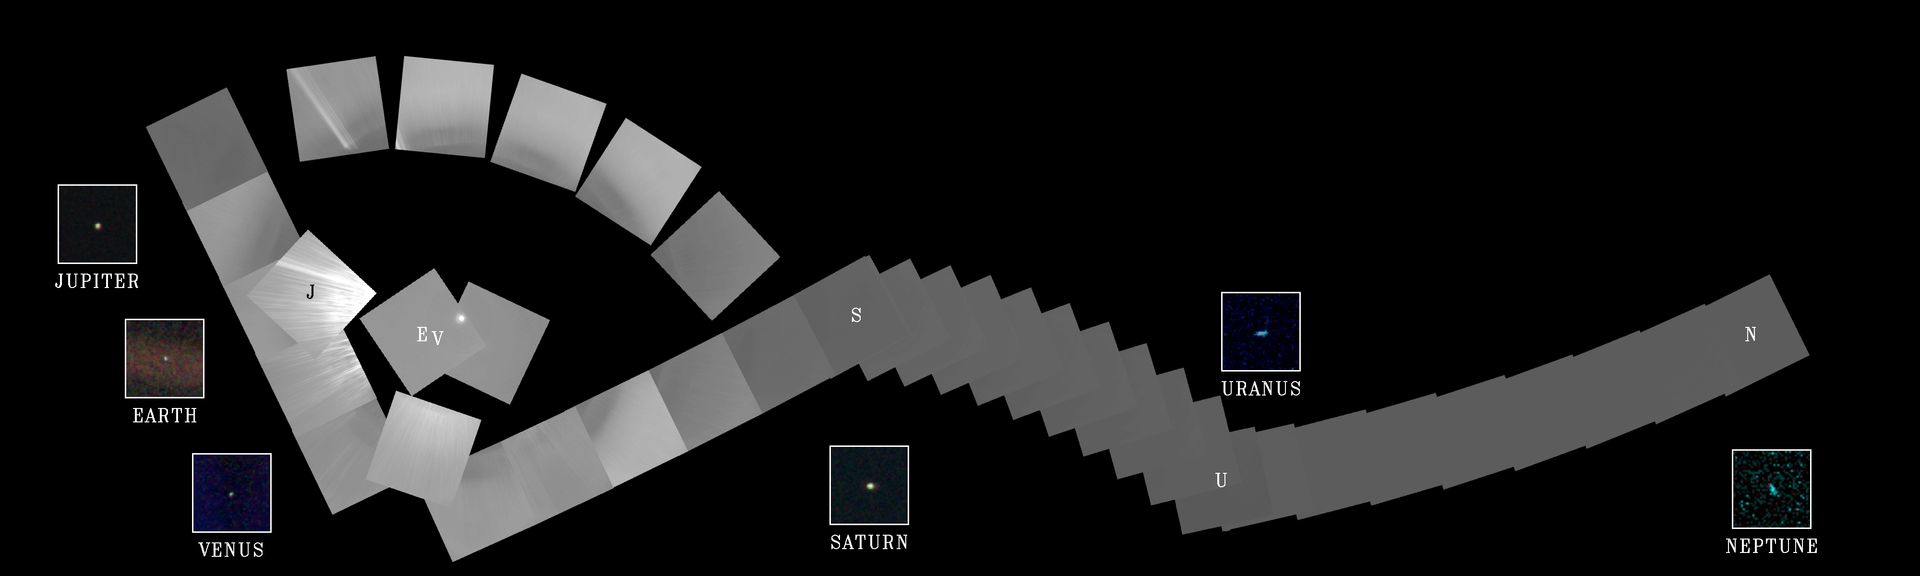 The Family Portrait of the Solar System taken by Voyager 1